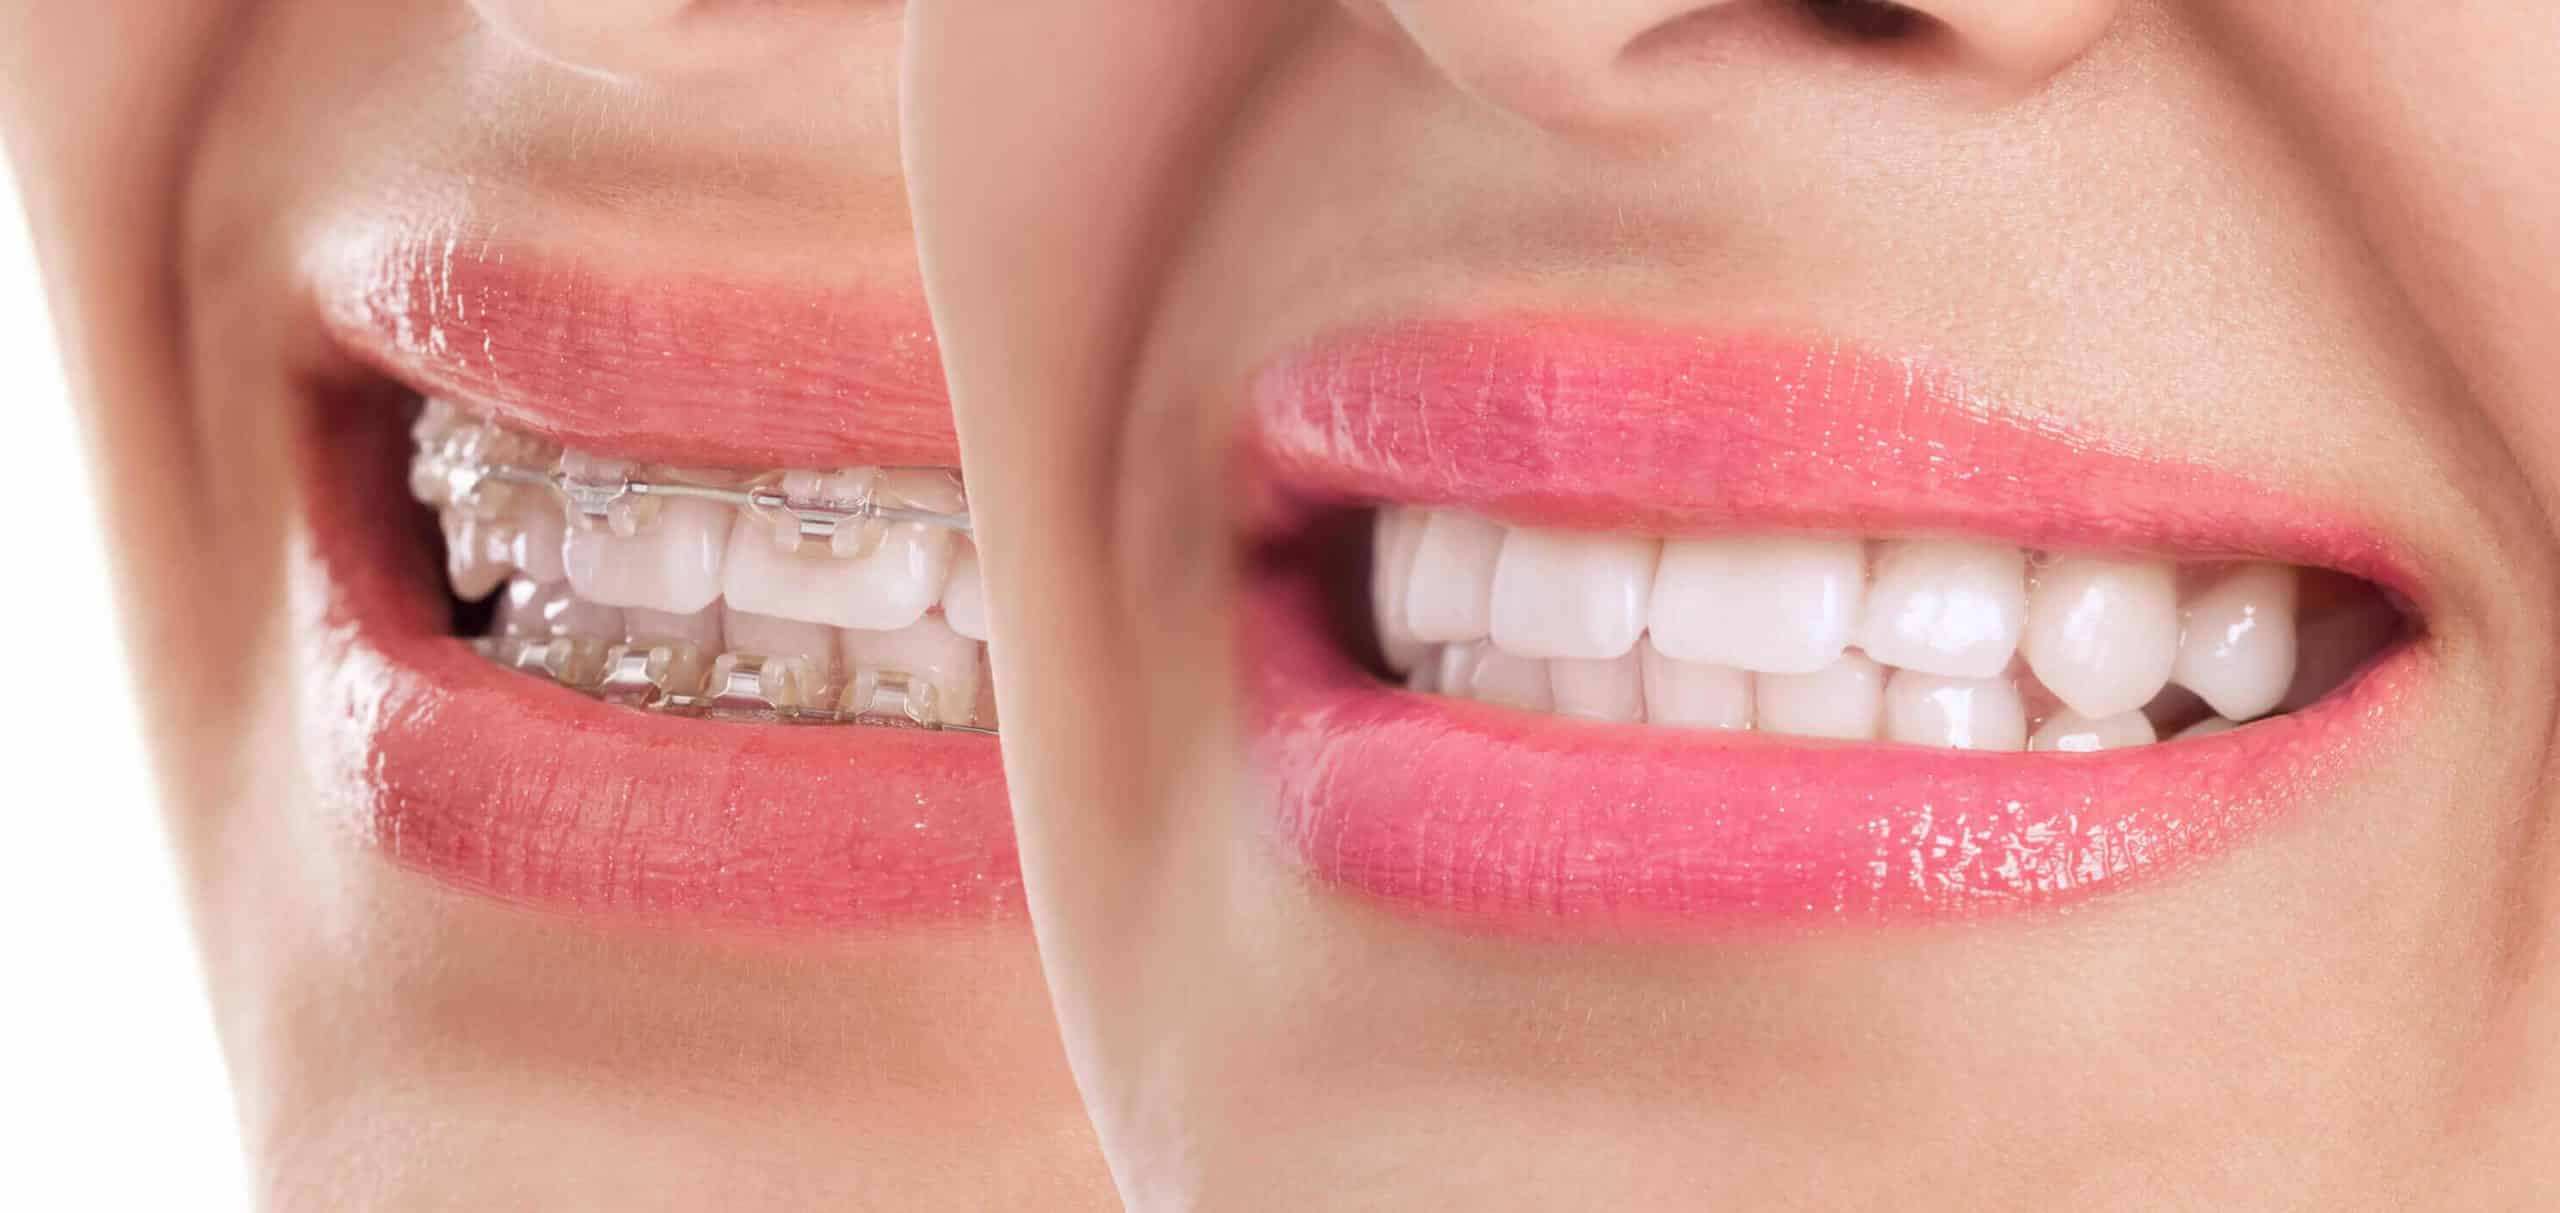 Featured image for “How To Avoid Braces”